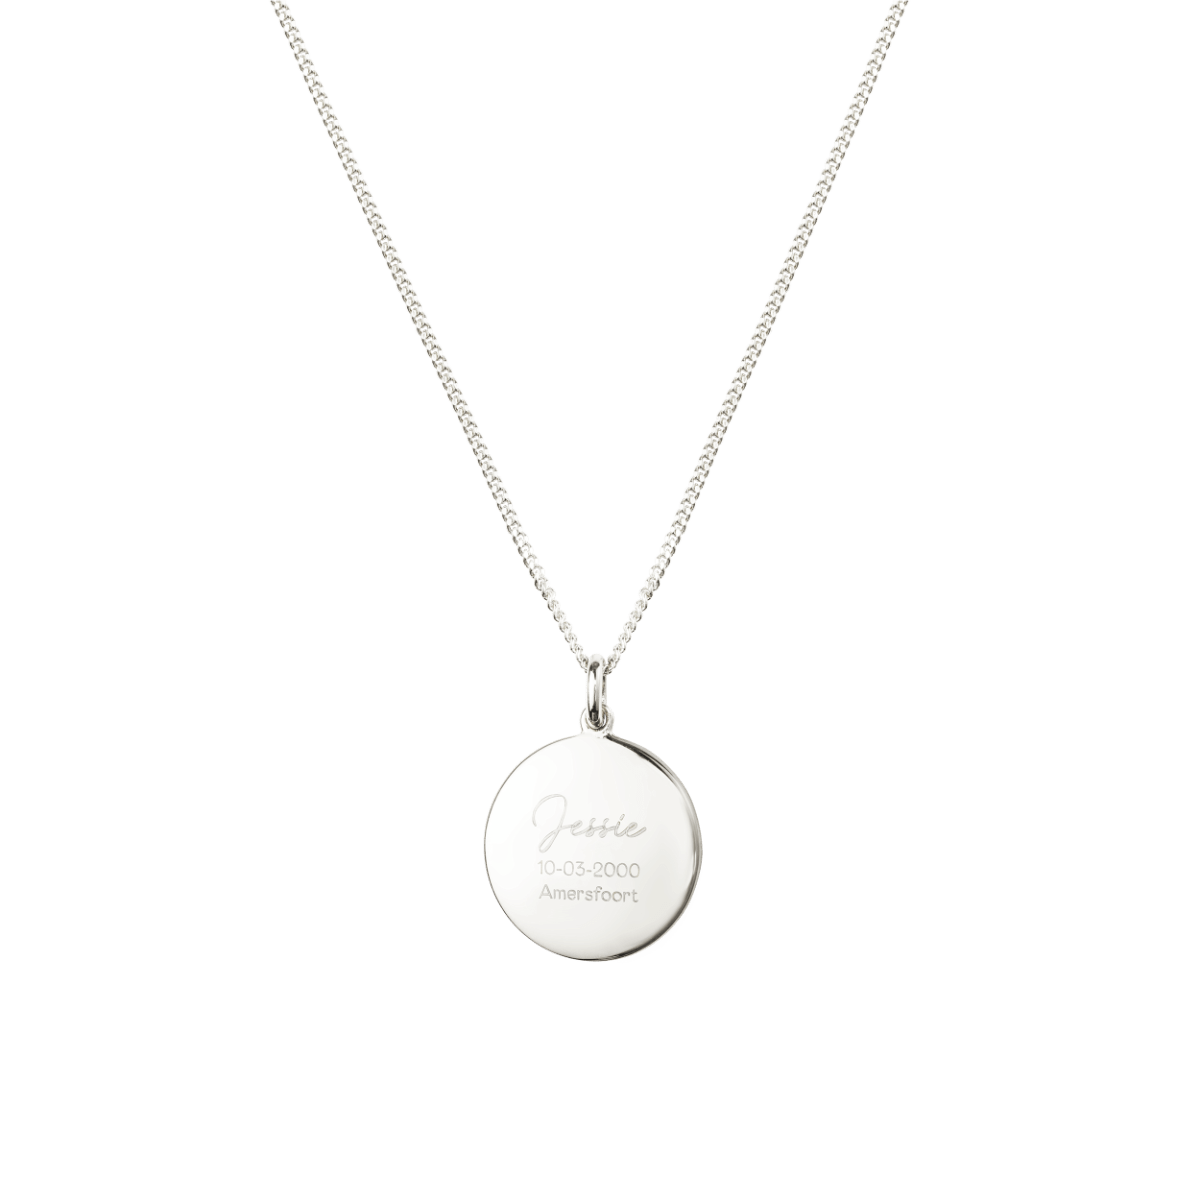 Moon Phase Coin Ketting